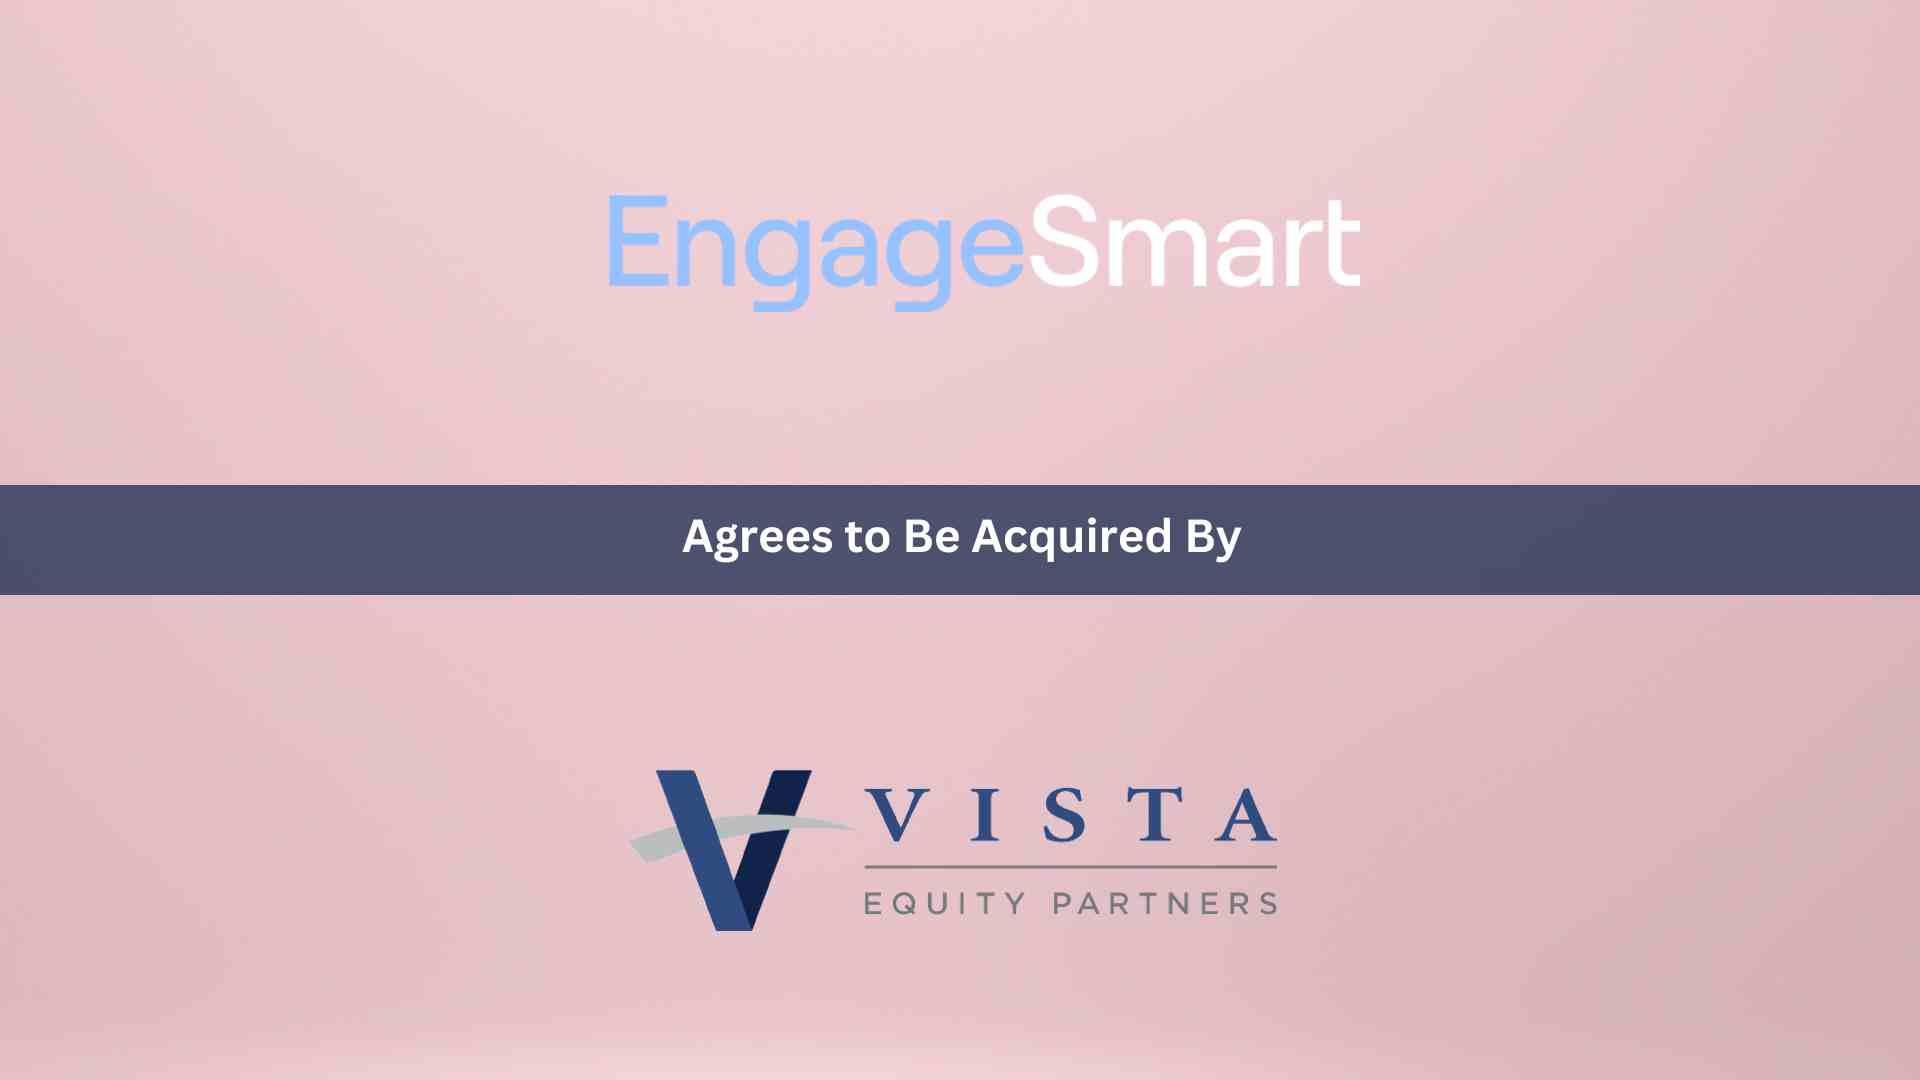 EngageSmart Agrees to Be Acquired by Vista Equity Partners for $4.0 Billion